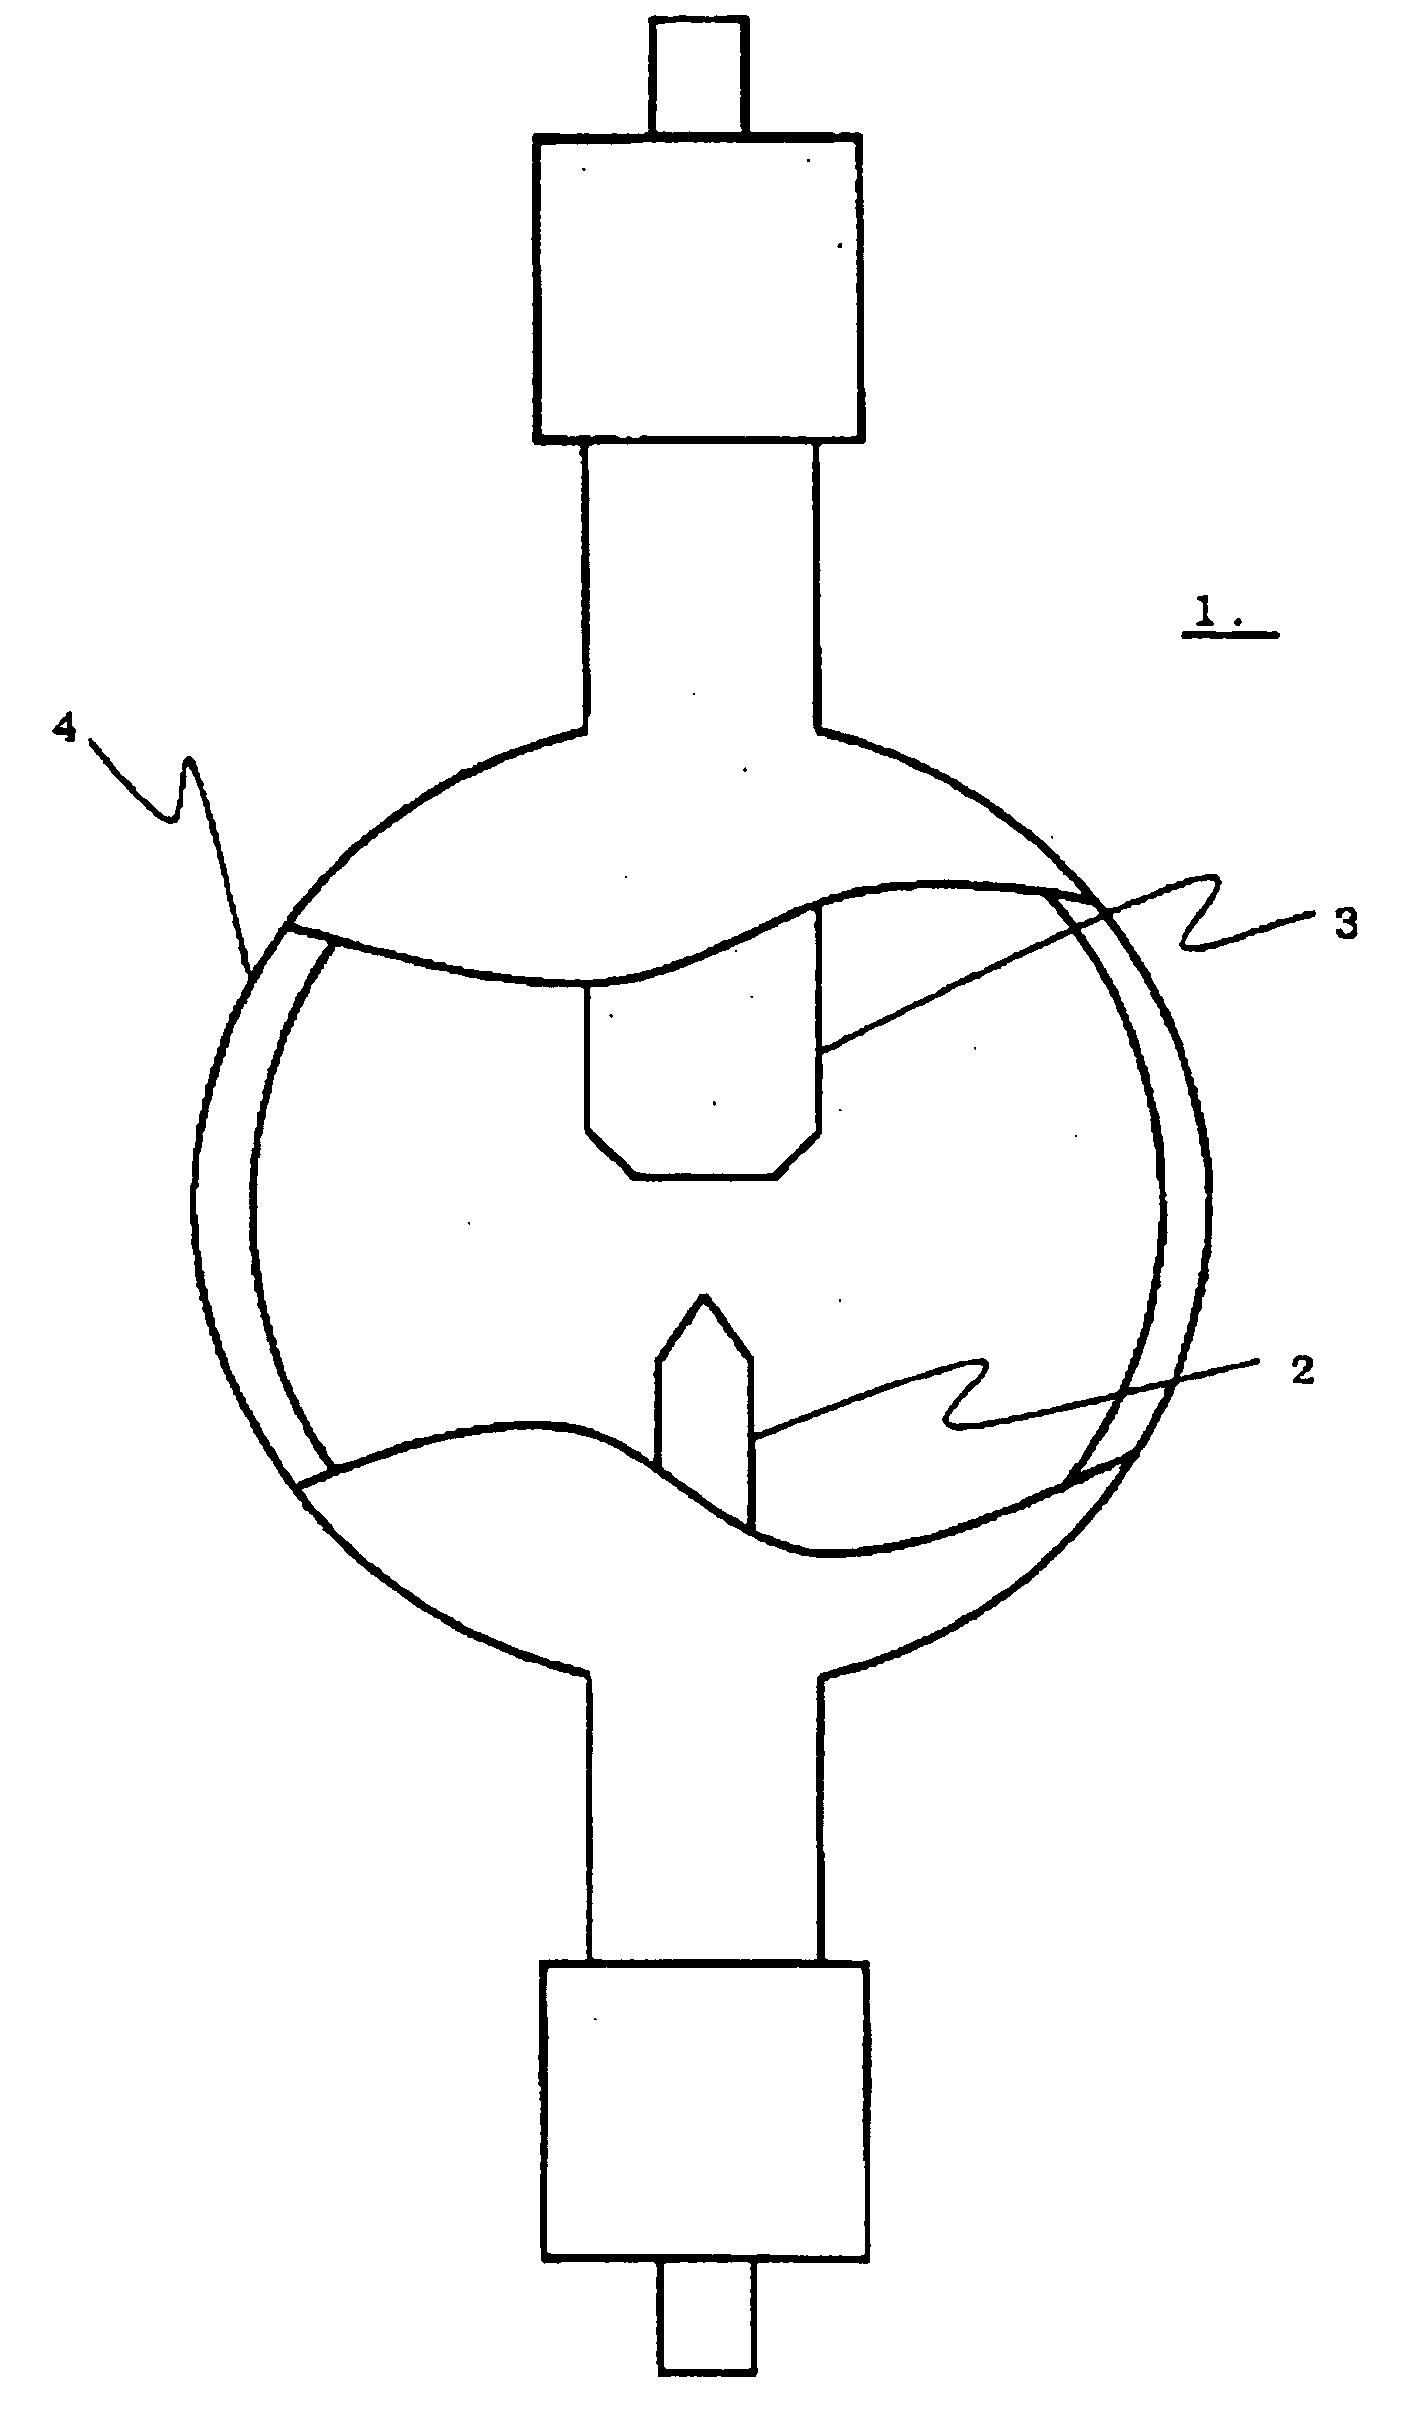 High-load and high-intensity discharge lamp